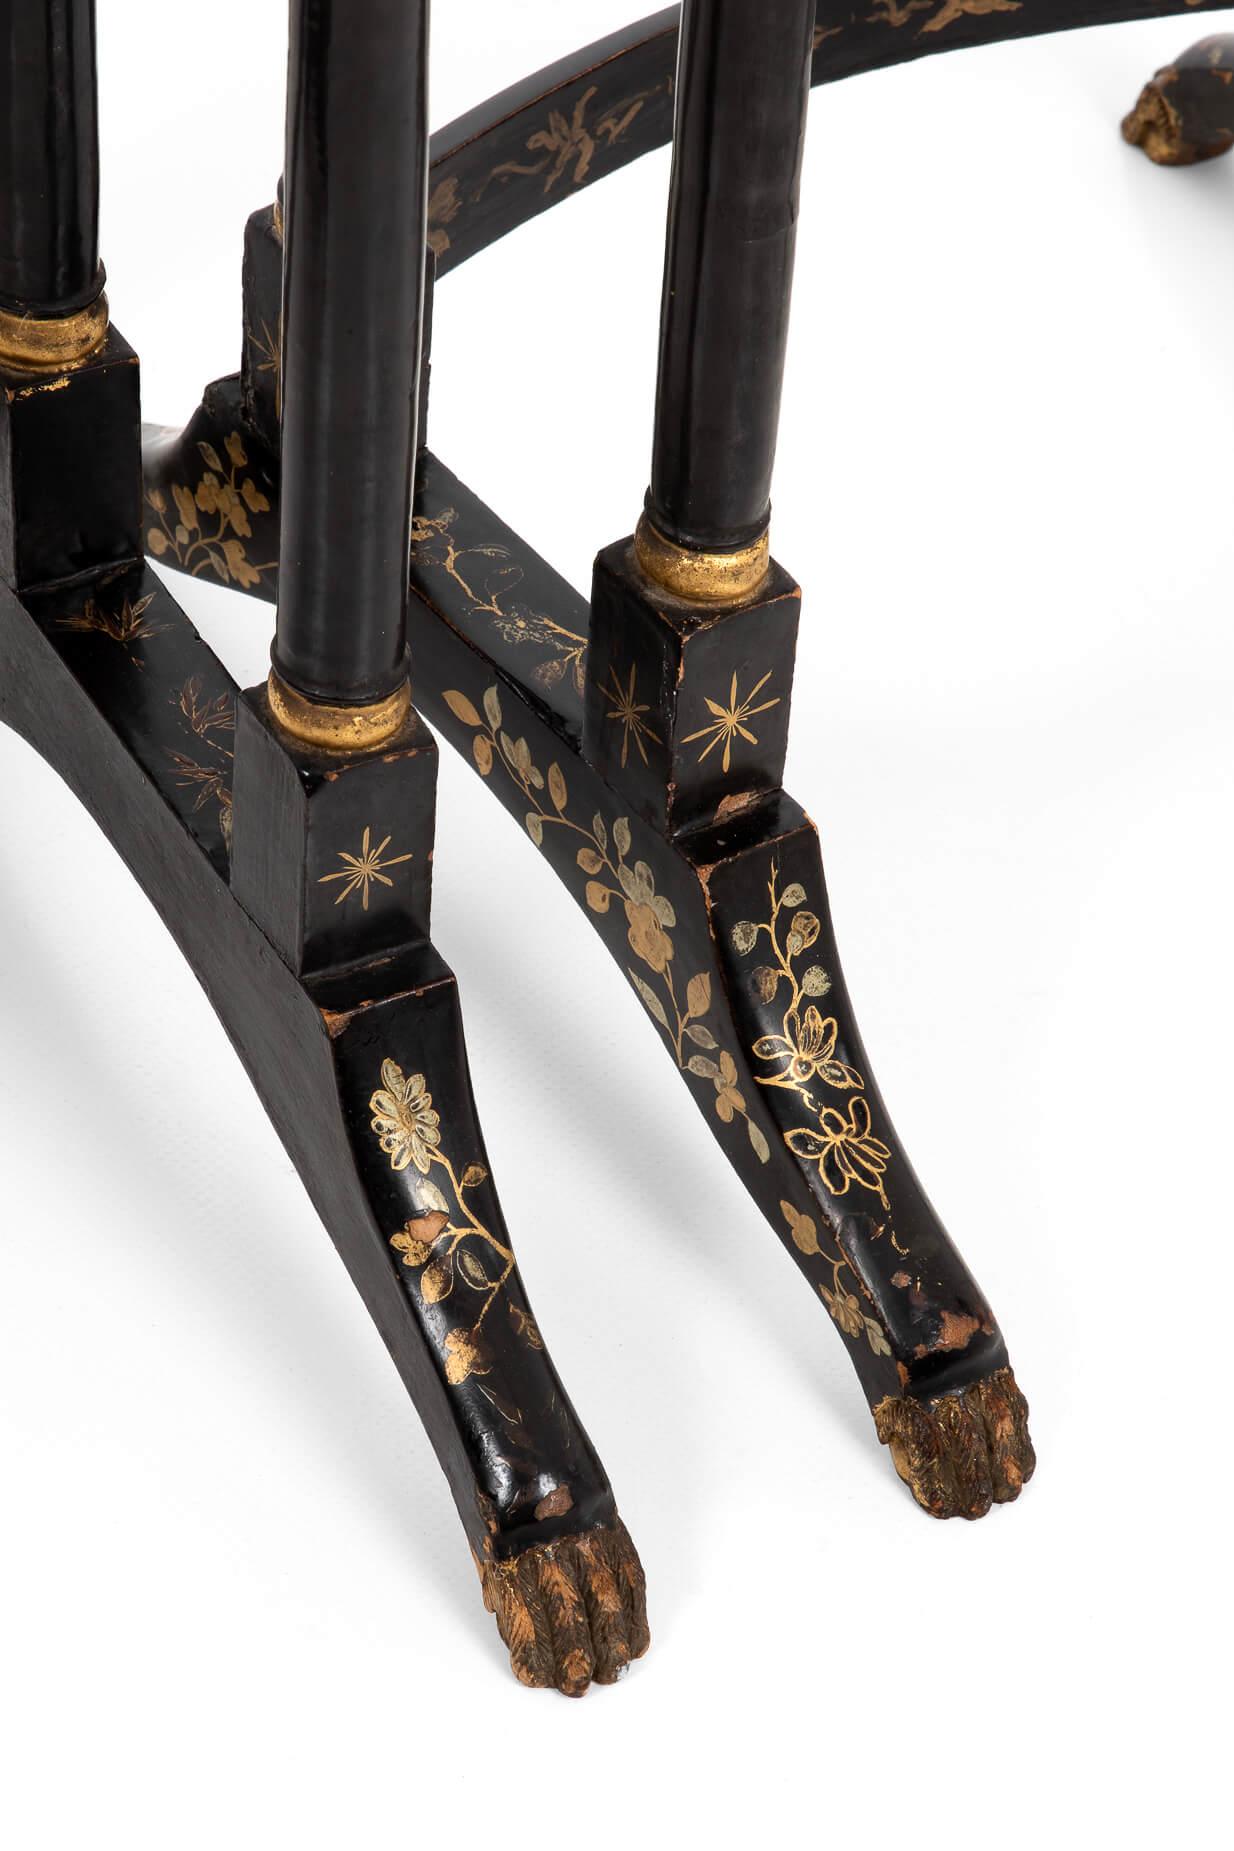 Nest of Three Regency Chinoiserie Gilt And Black Lacquer Tables, circa 1815 For Sale 8